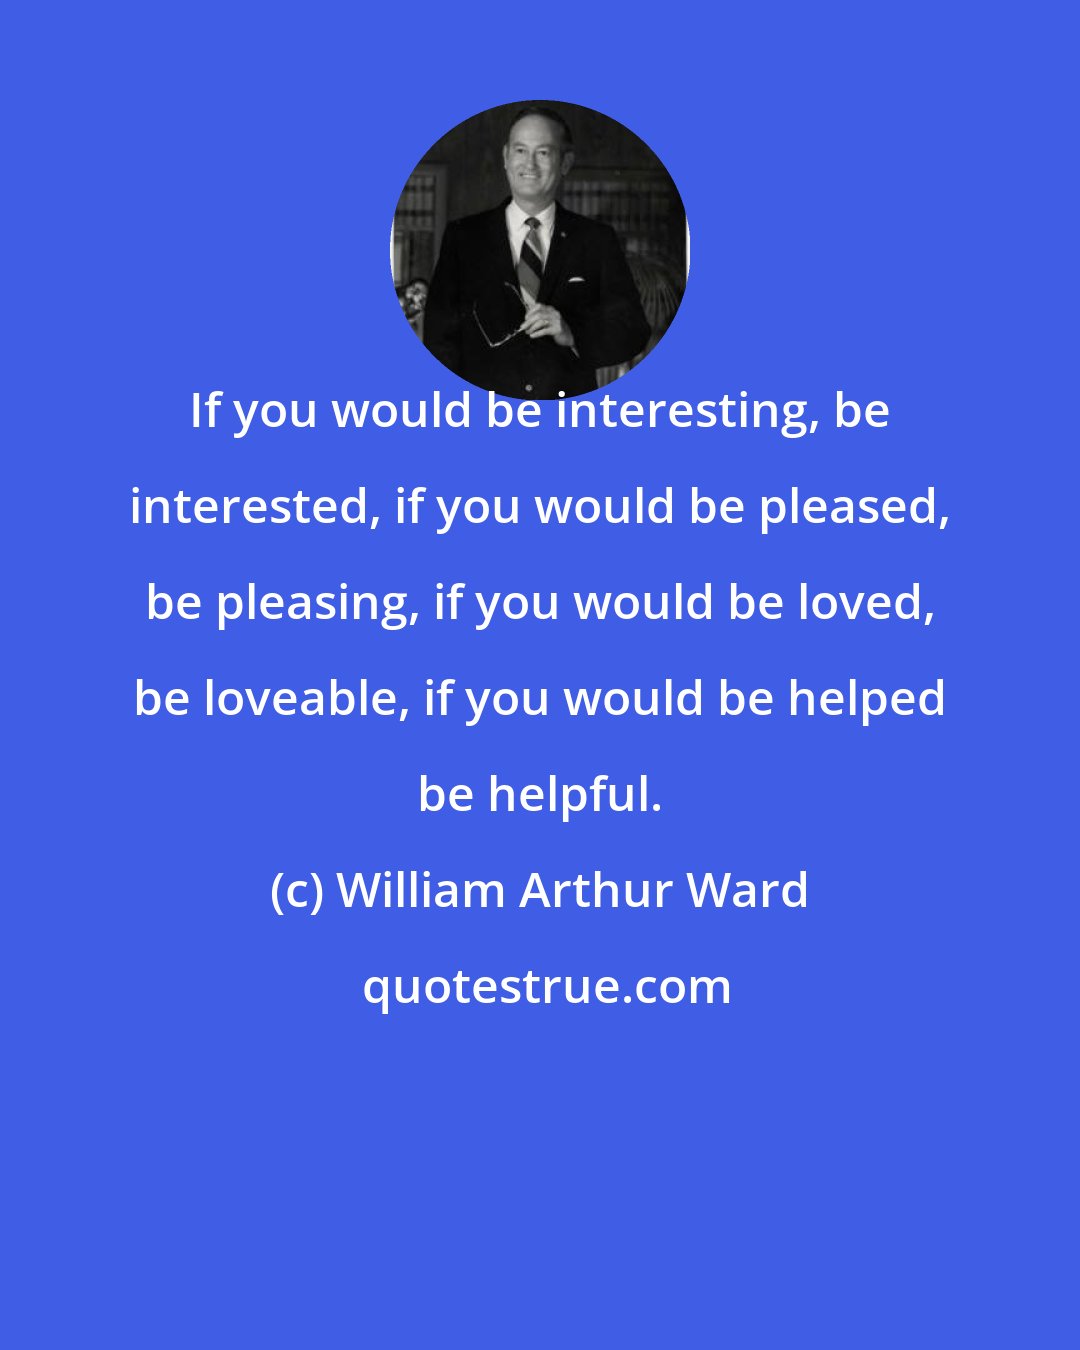 William Arthur Ward: If you would be interesting, be interested, if you would be pleased, be pleasing, if you would be loved, be loveable, if you would be helped be helpful.